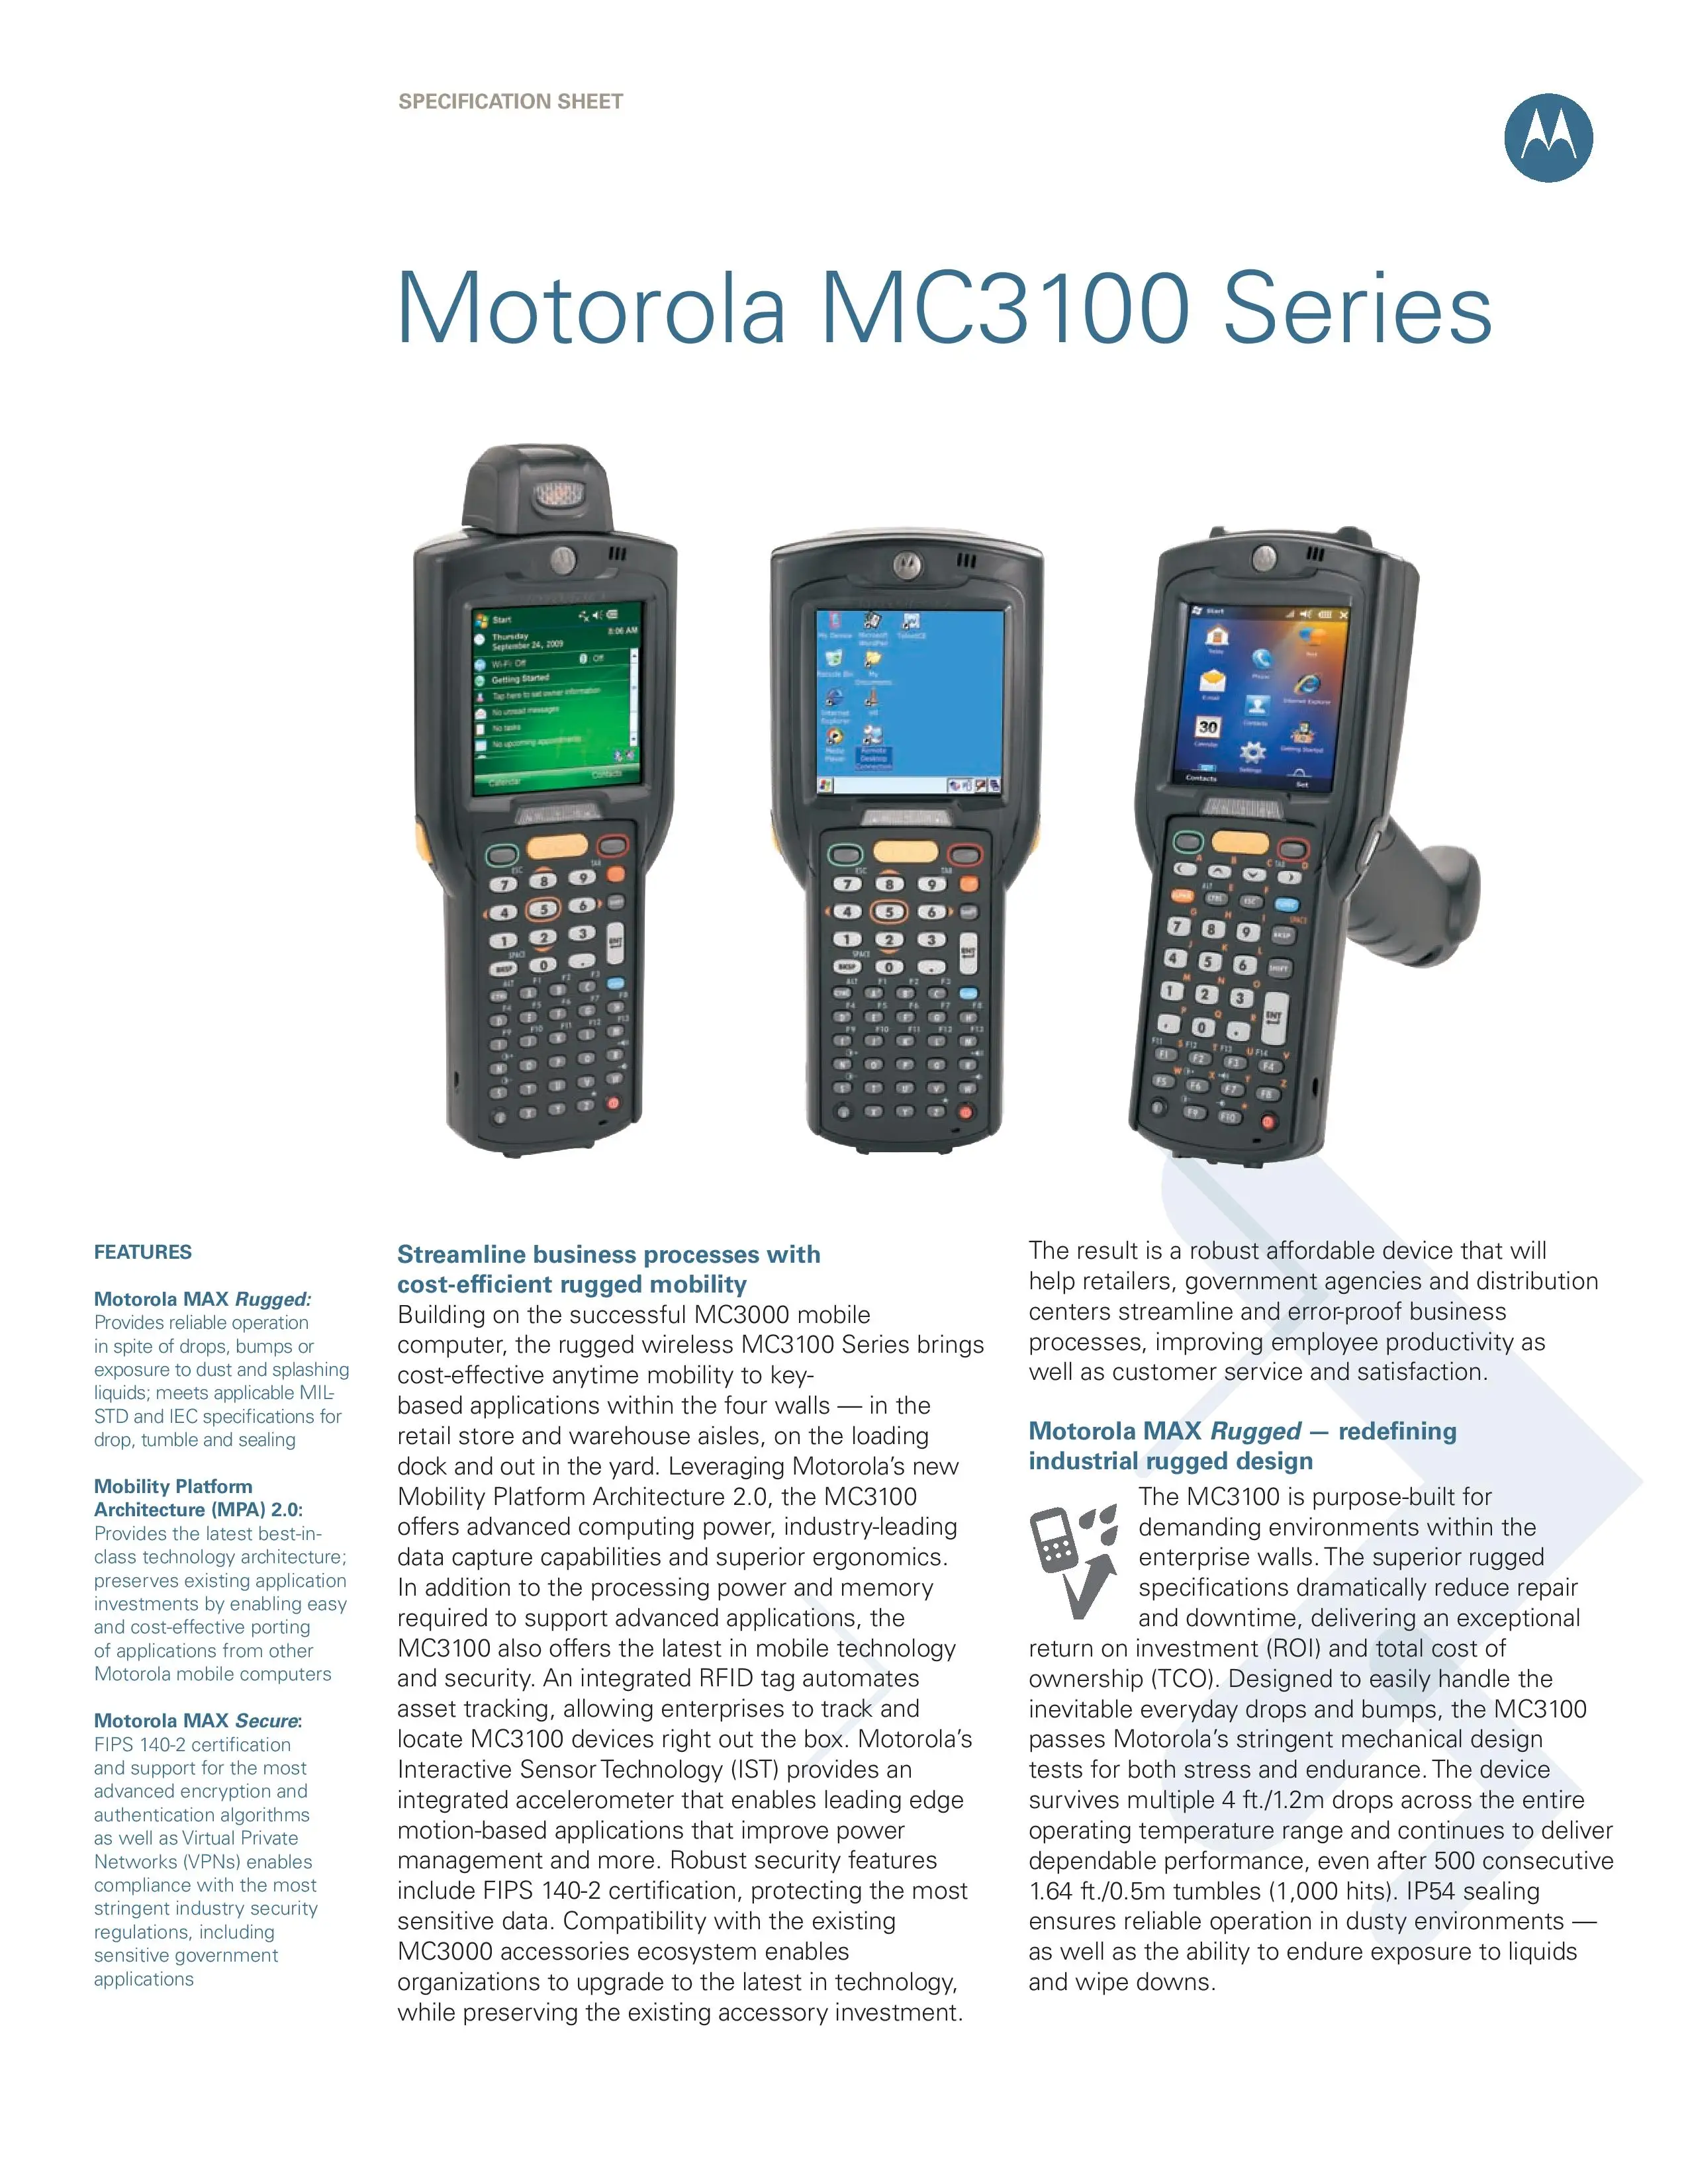 Hot Selling MC3190G - Handheld Computer PDA with Win CE 6.0 system